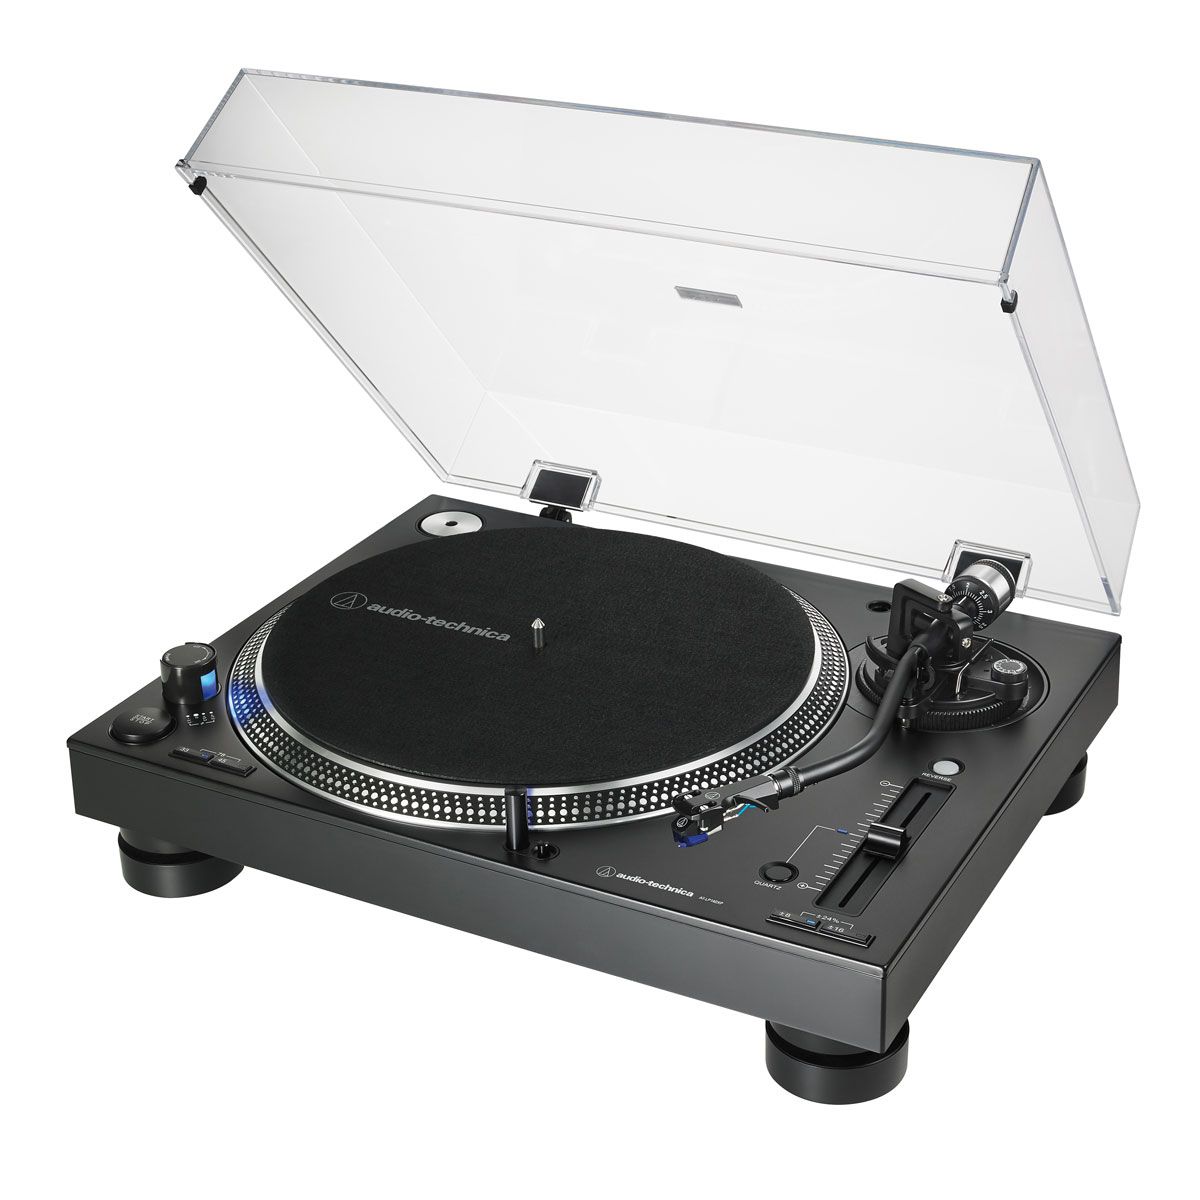 Audio-Technica LP140XP Direct-Drive Professional DJ Turntable - front angled view